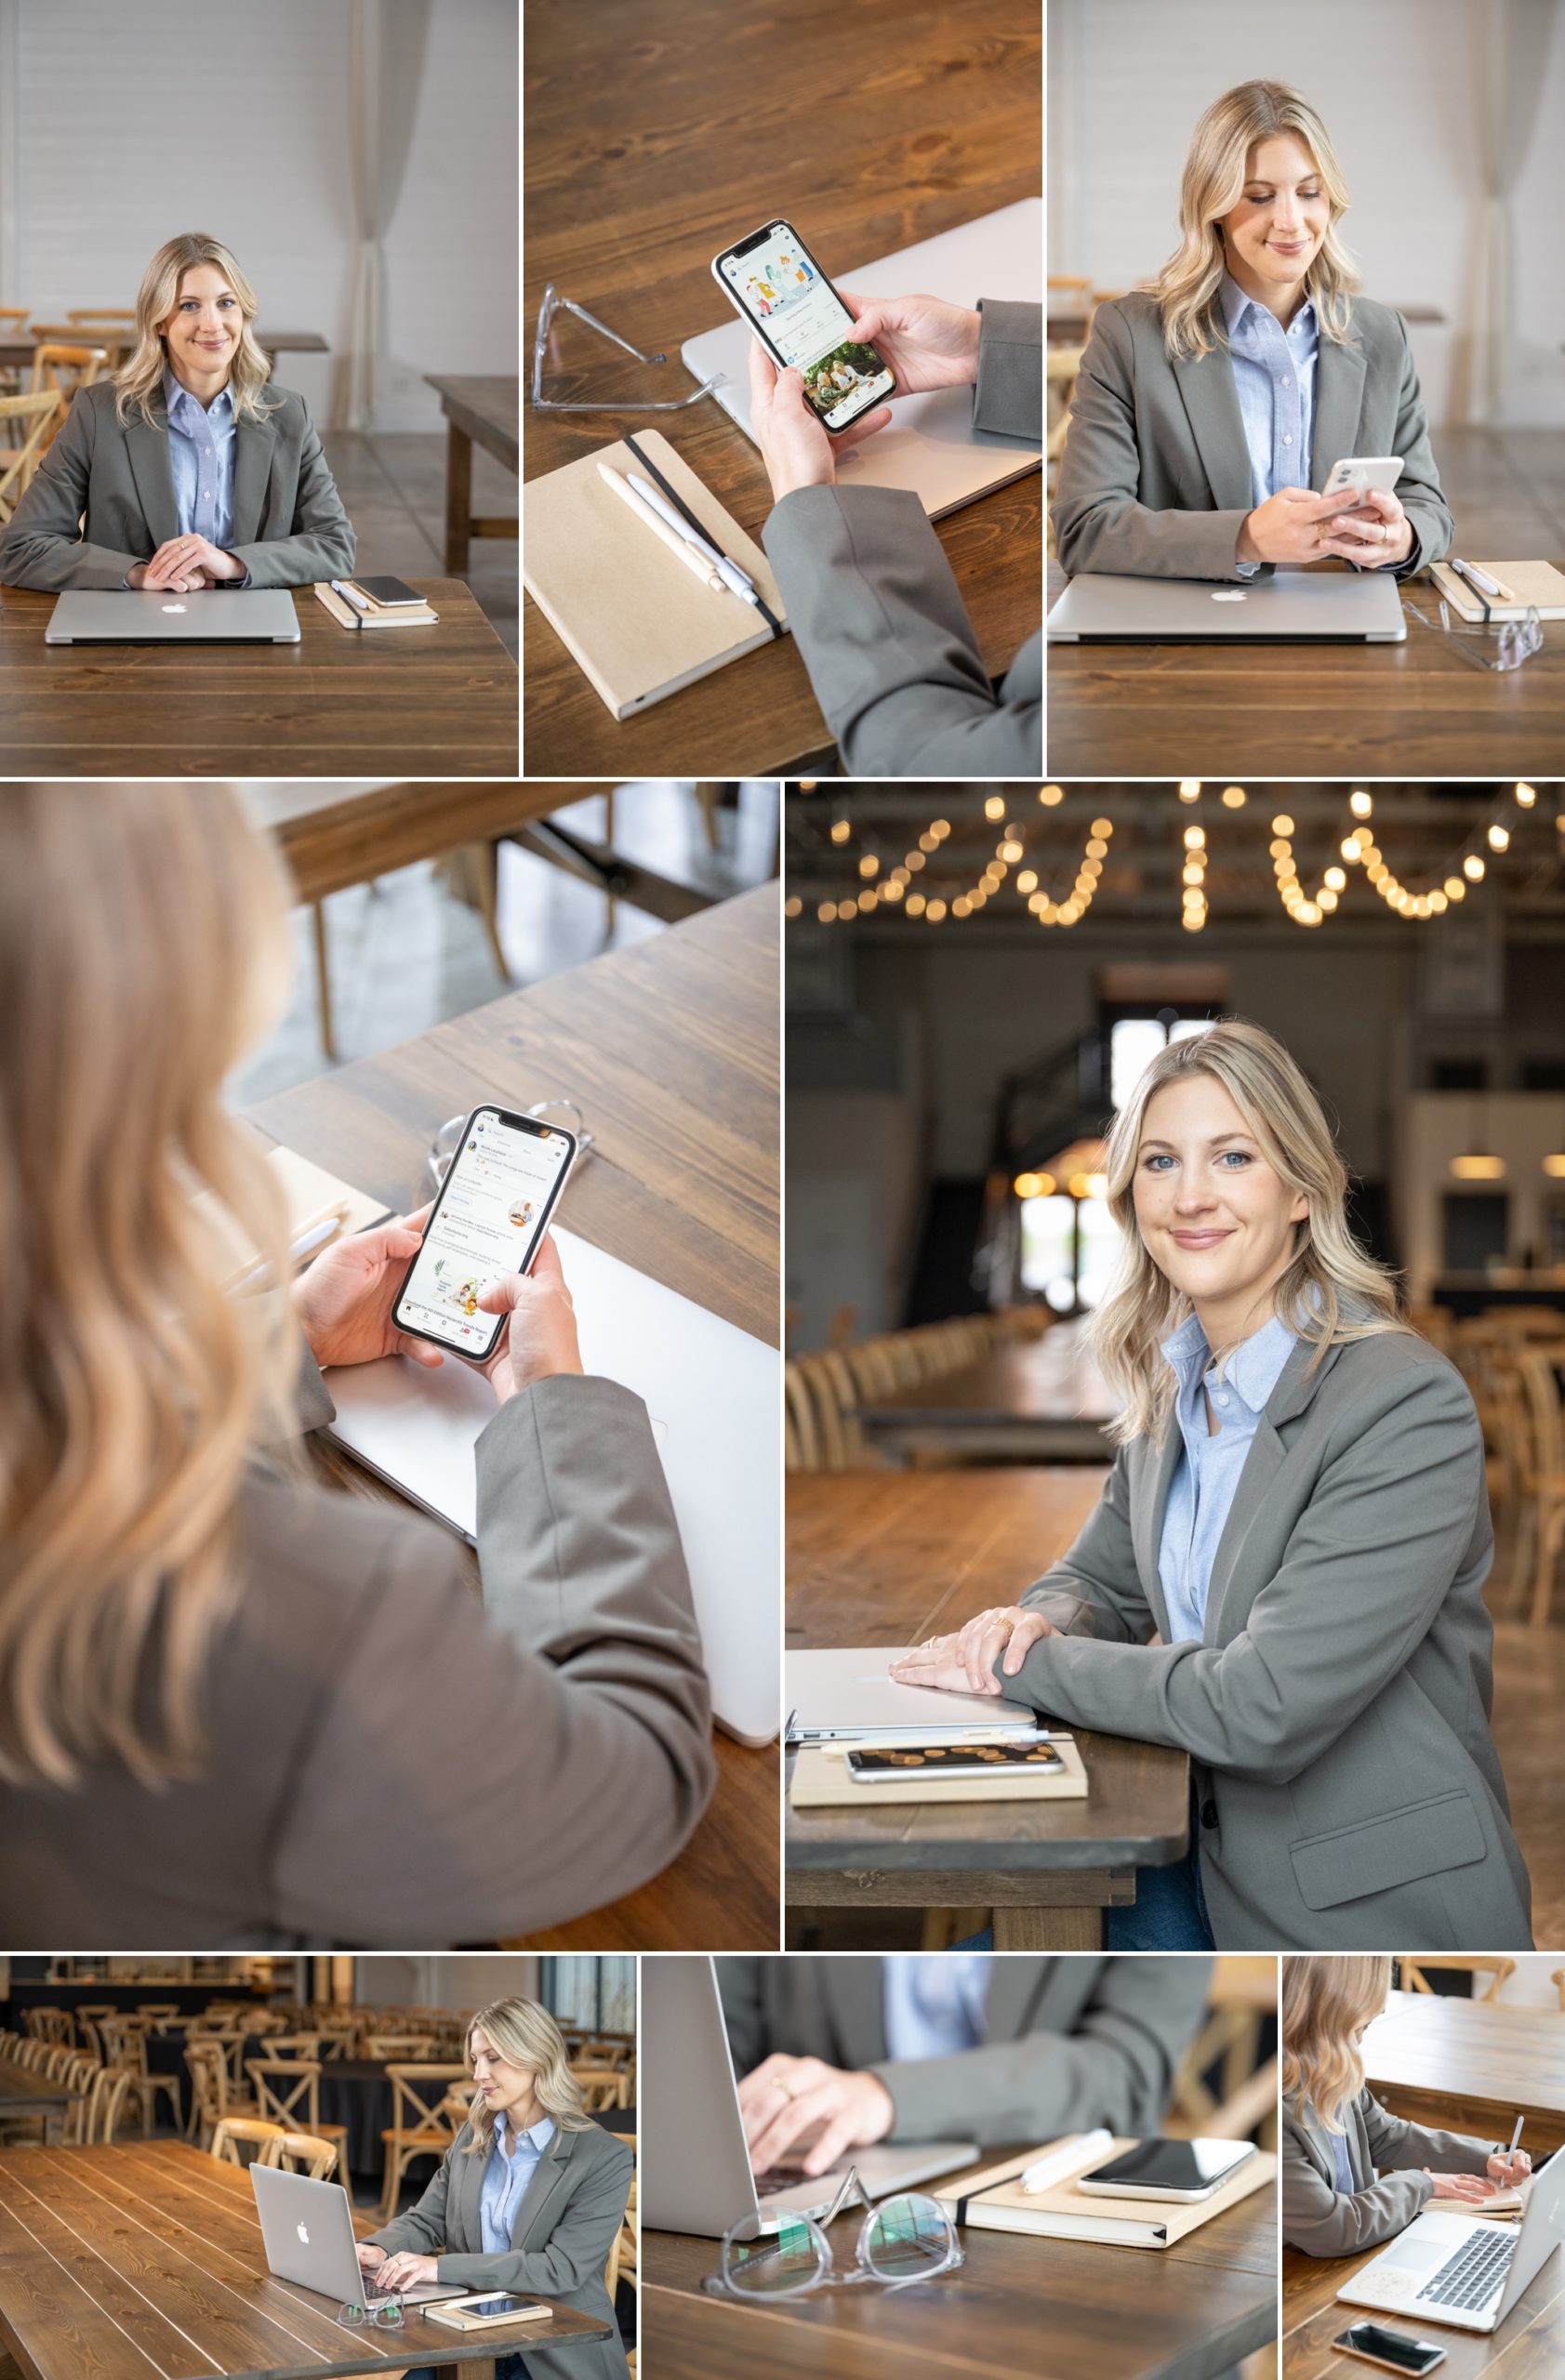 A collage of brand images of a Blonde Business Woman in a light blue button shirt and grey jacket, seated at a table with her phone, apple laptop, pens and journal.